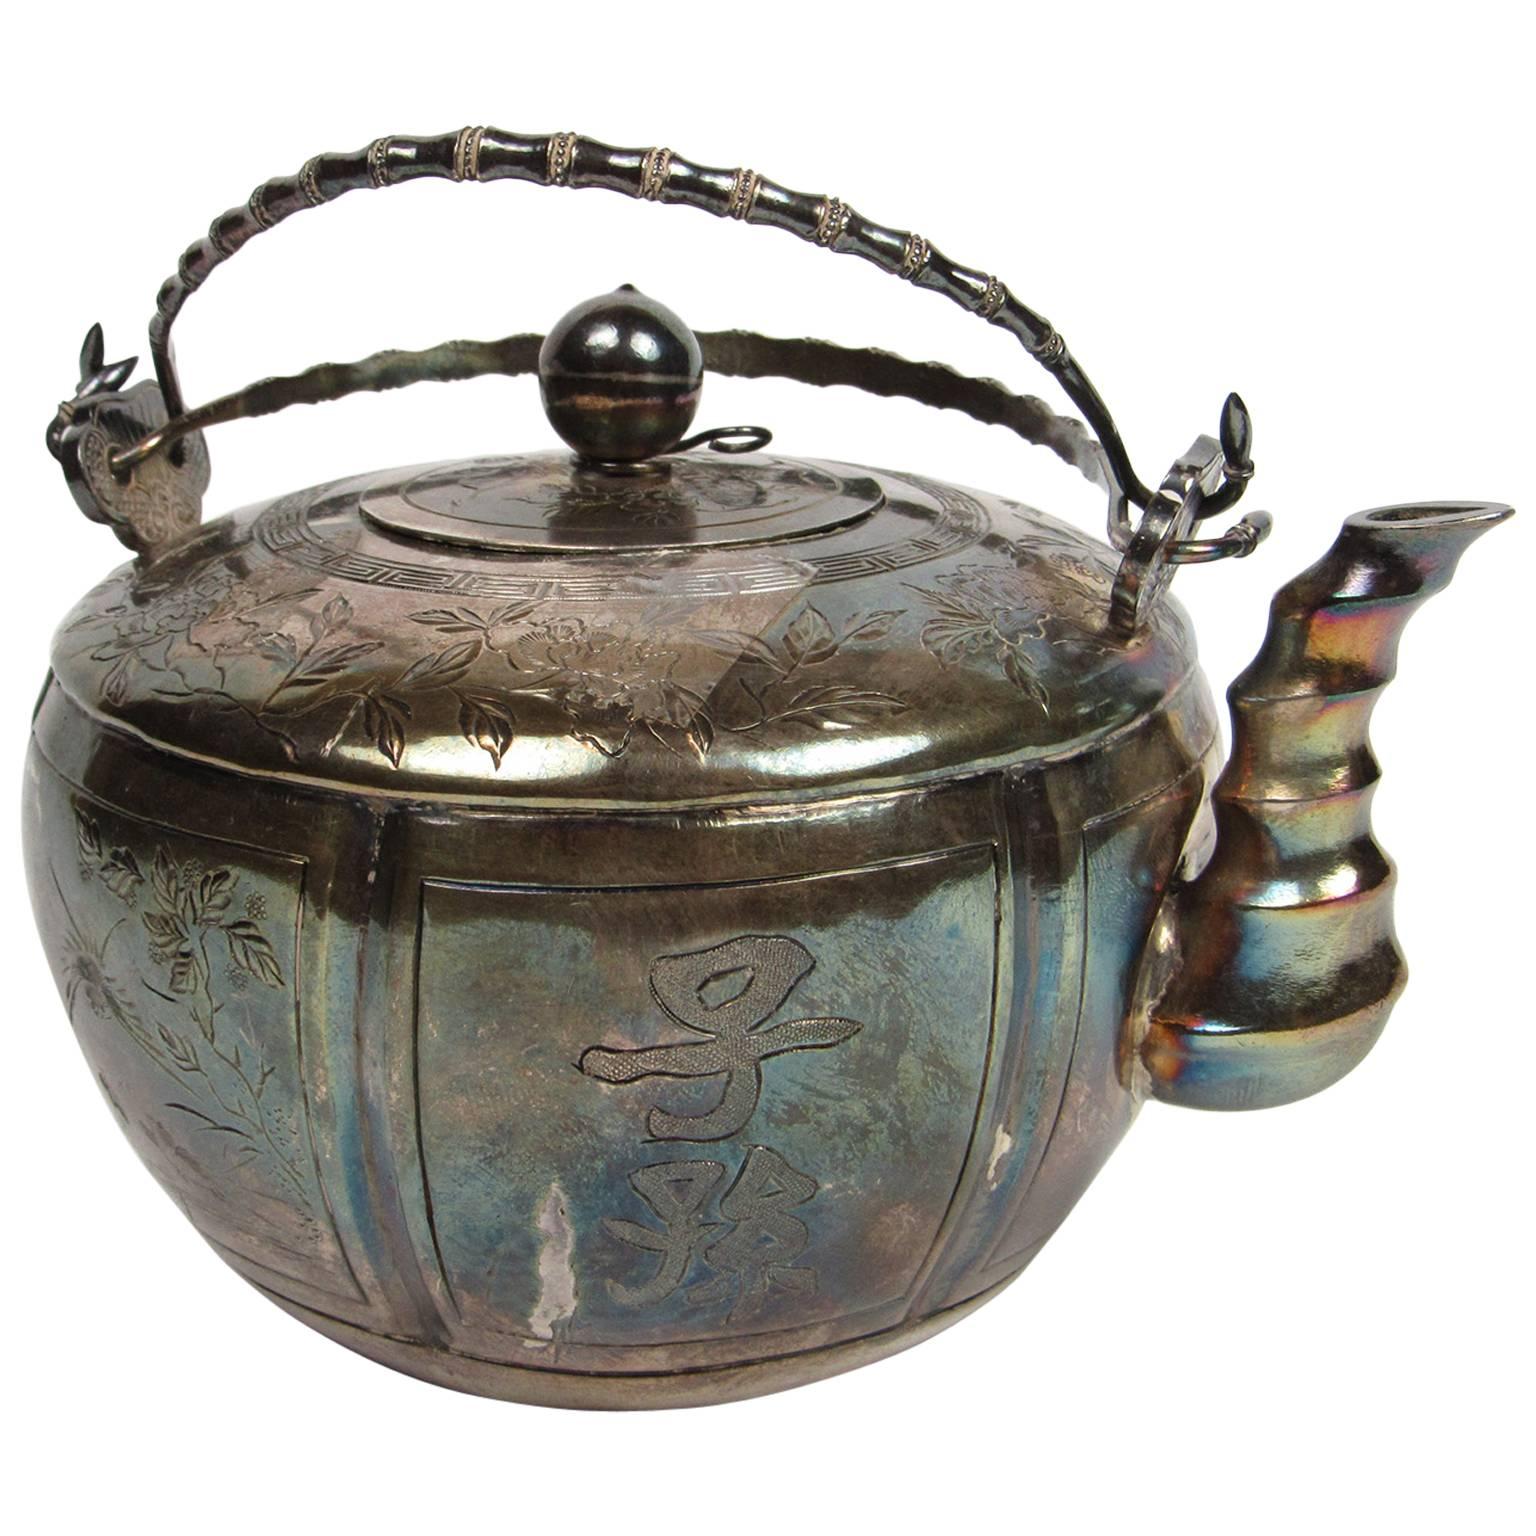 Signed Japanese Silver Calligraphic Teapot